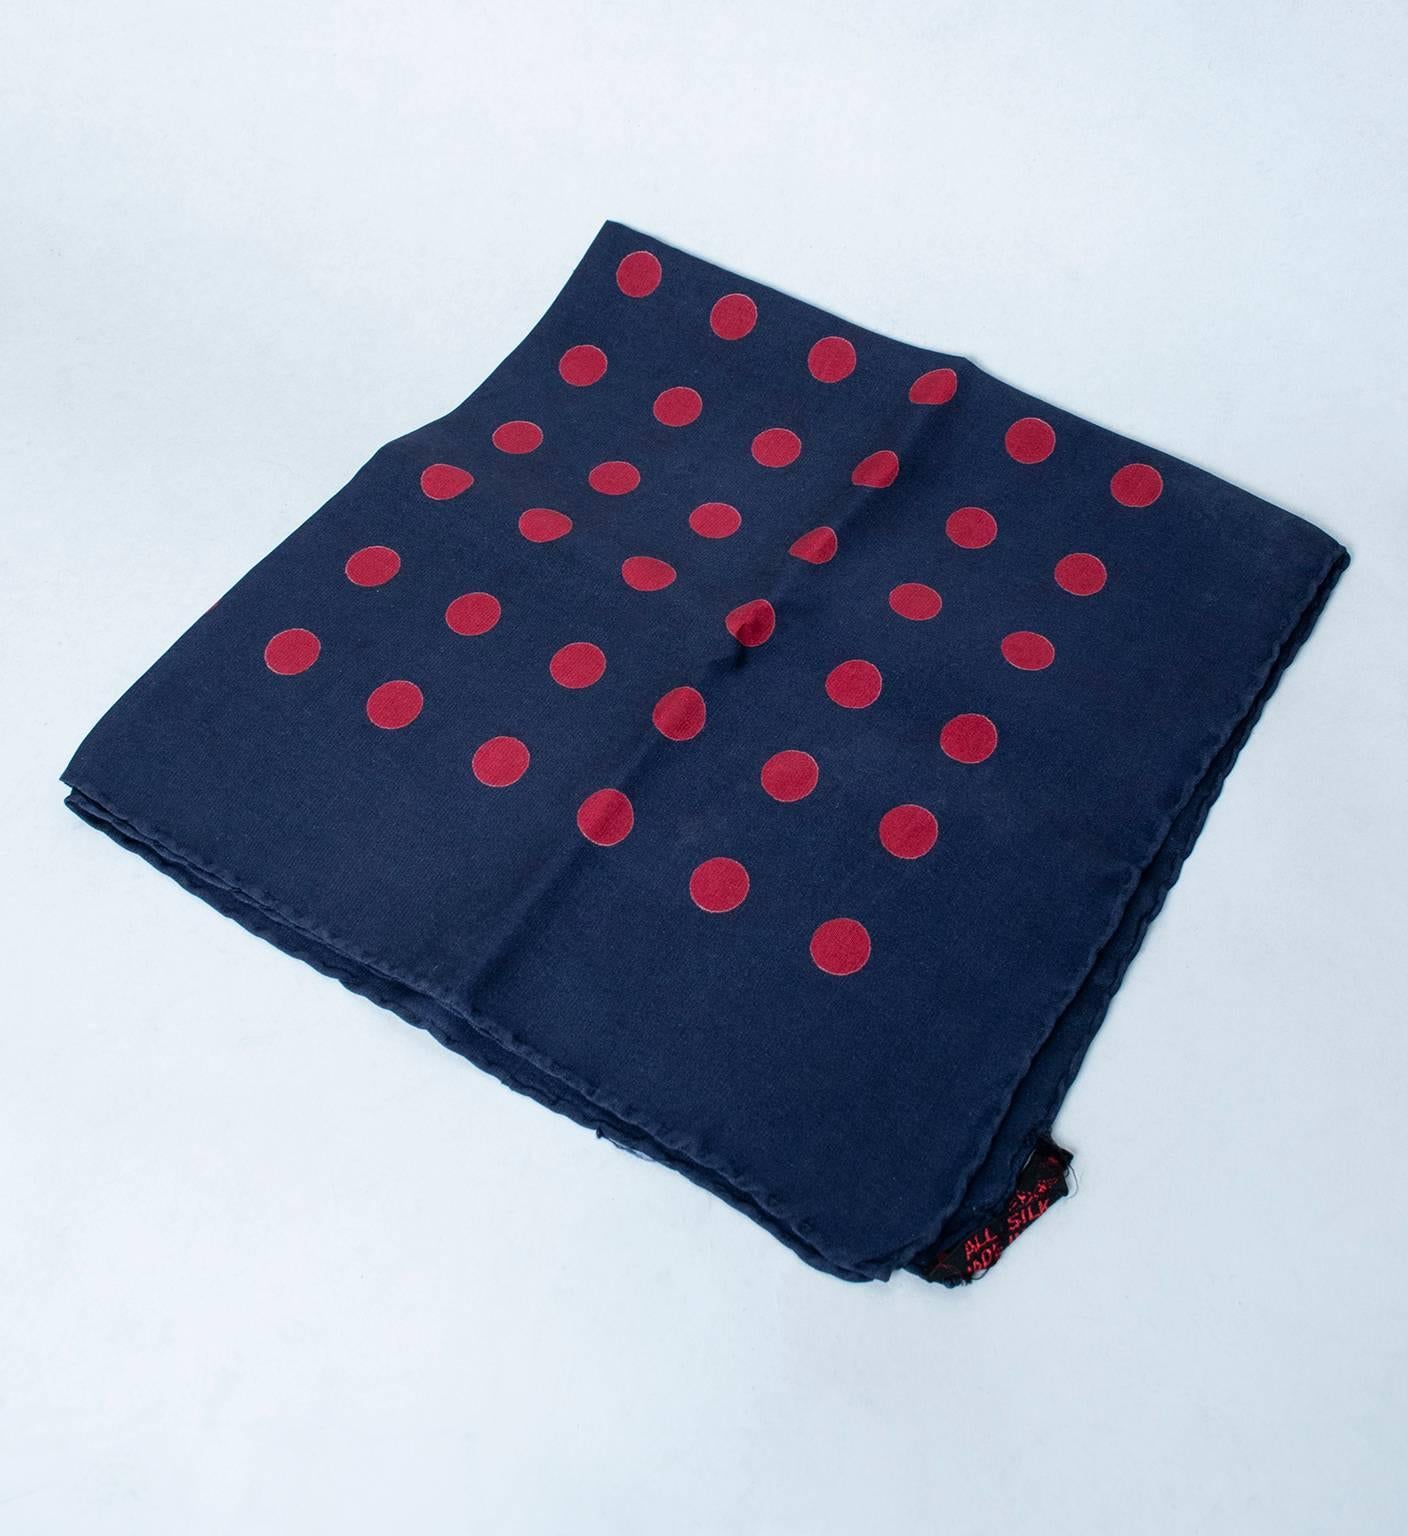 Playful, preppy and nautical, this sumptuous pocket square will leave you feeling like you’ve spent a day at the Yacht Club even if it’s only Wednesday. Just the right shade of crimson against a deep navy ground.

Italian silk pocket square;